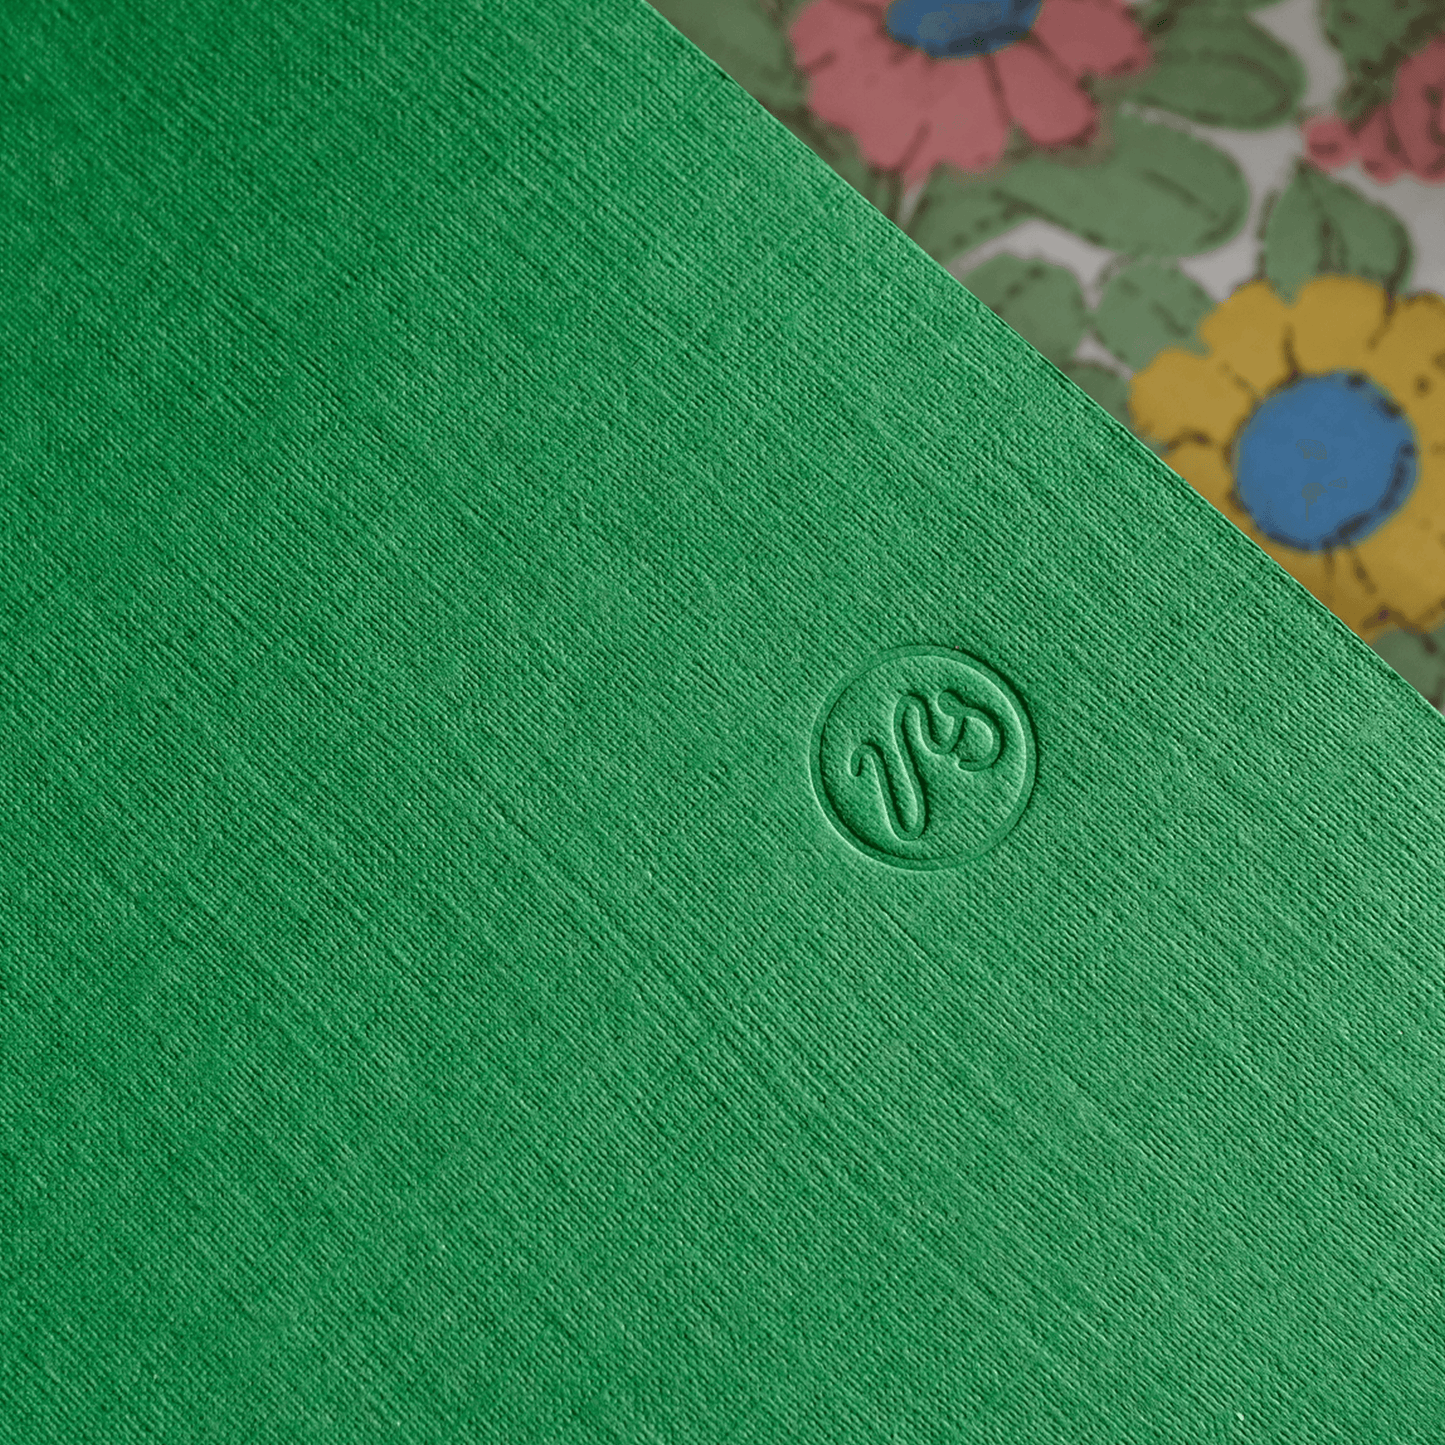 Embossed Papersmiths logo on linen